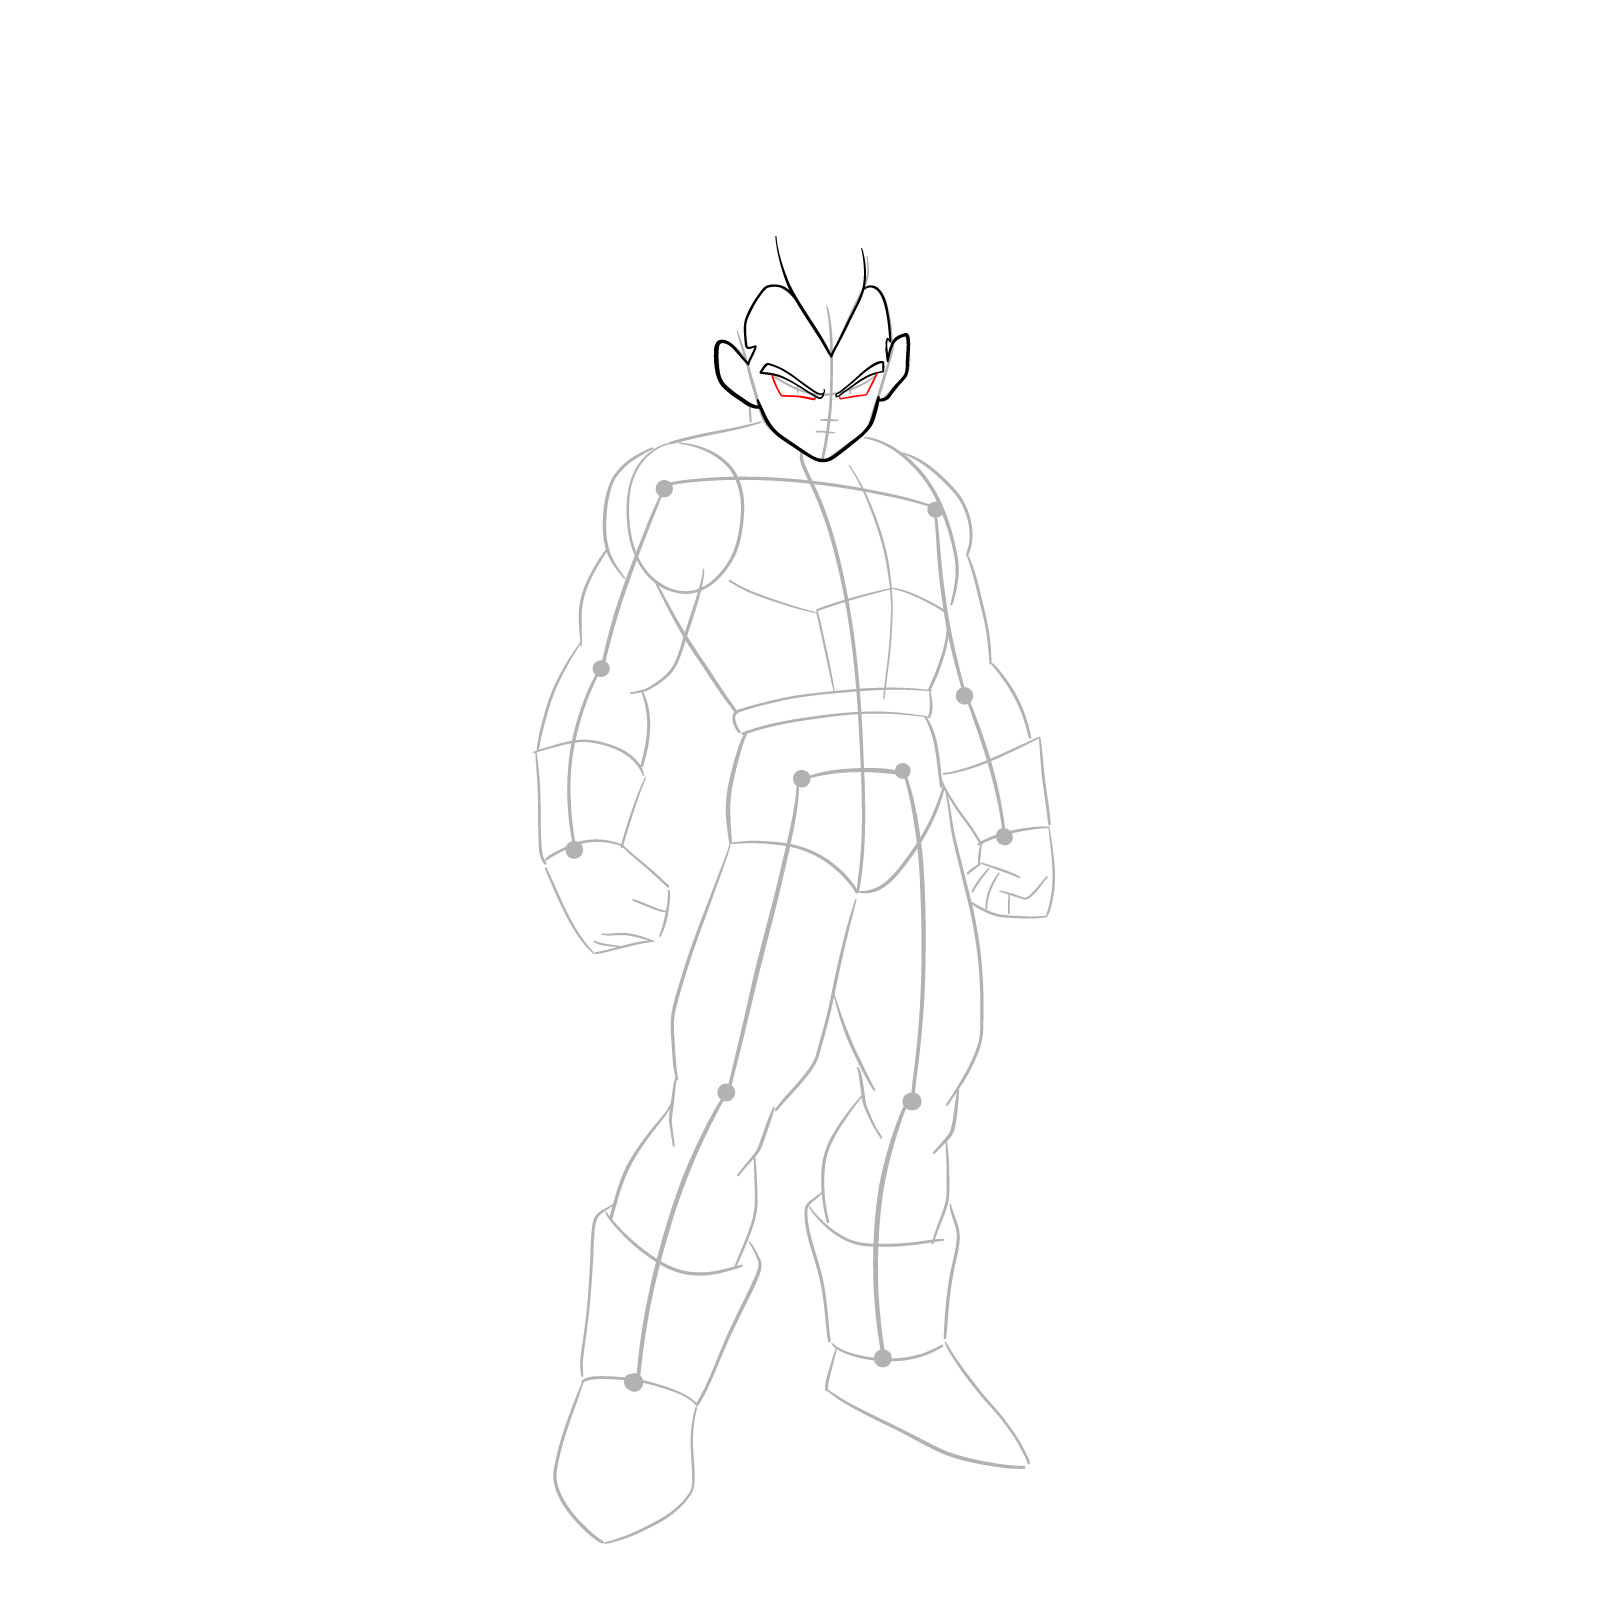 How to draw Vegeta in SSGSS - step 09